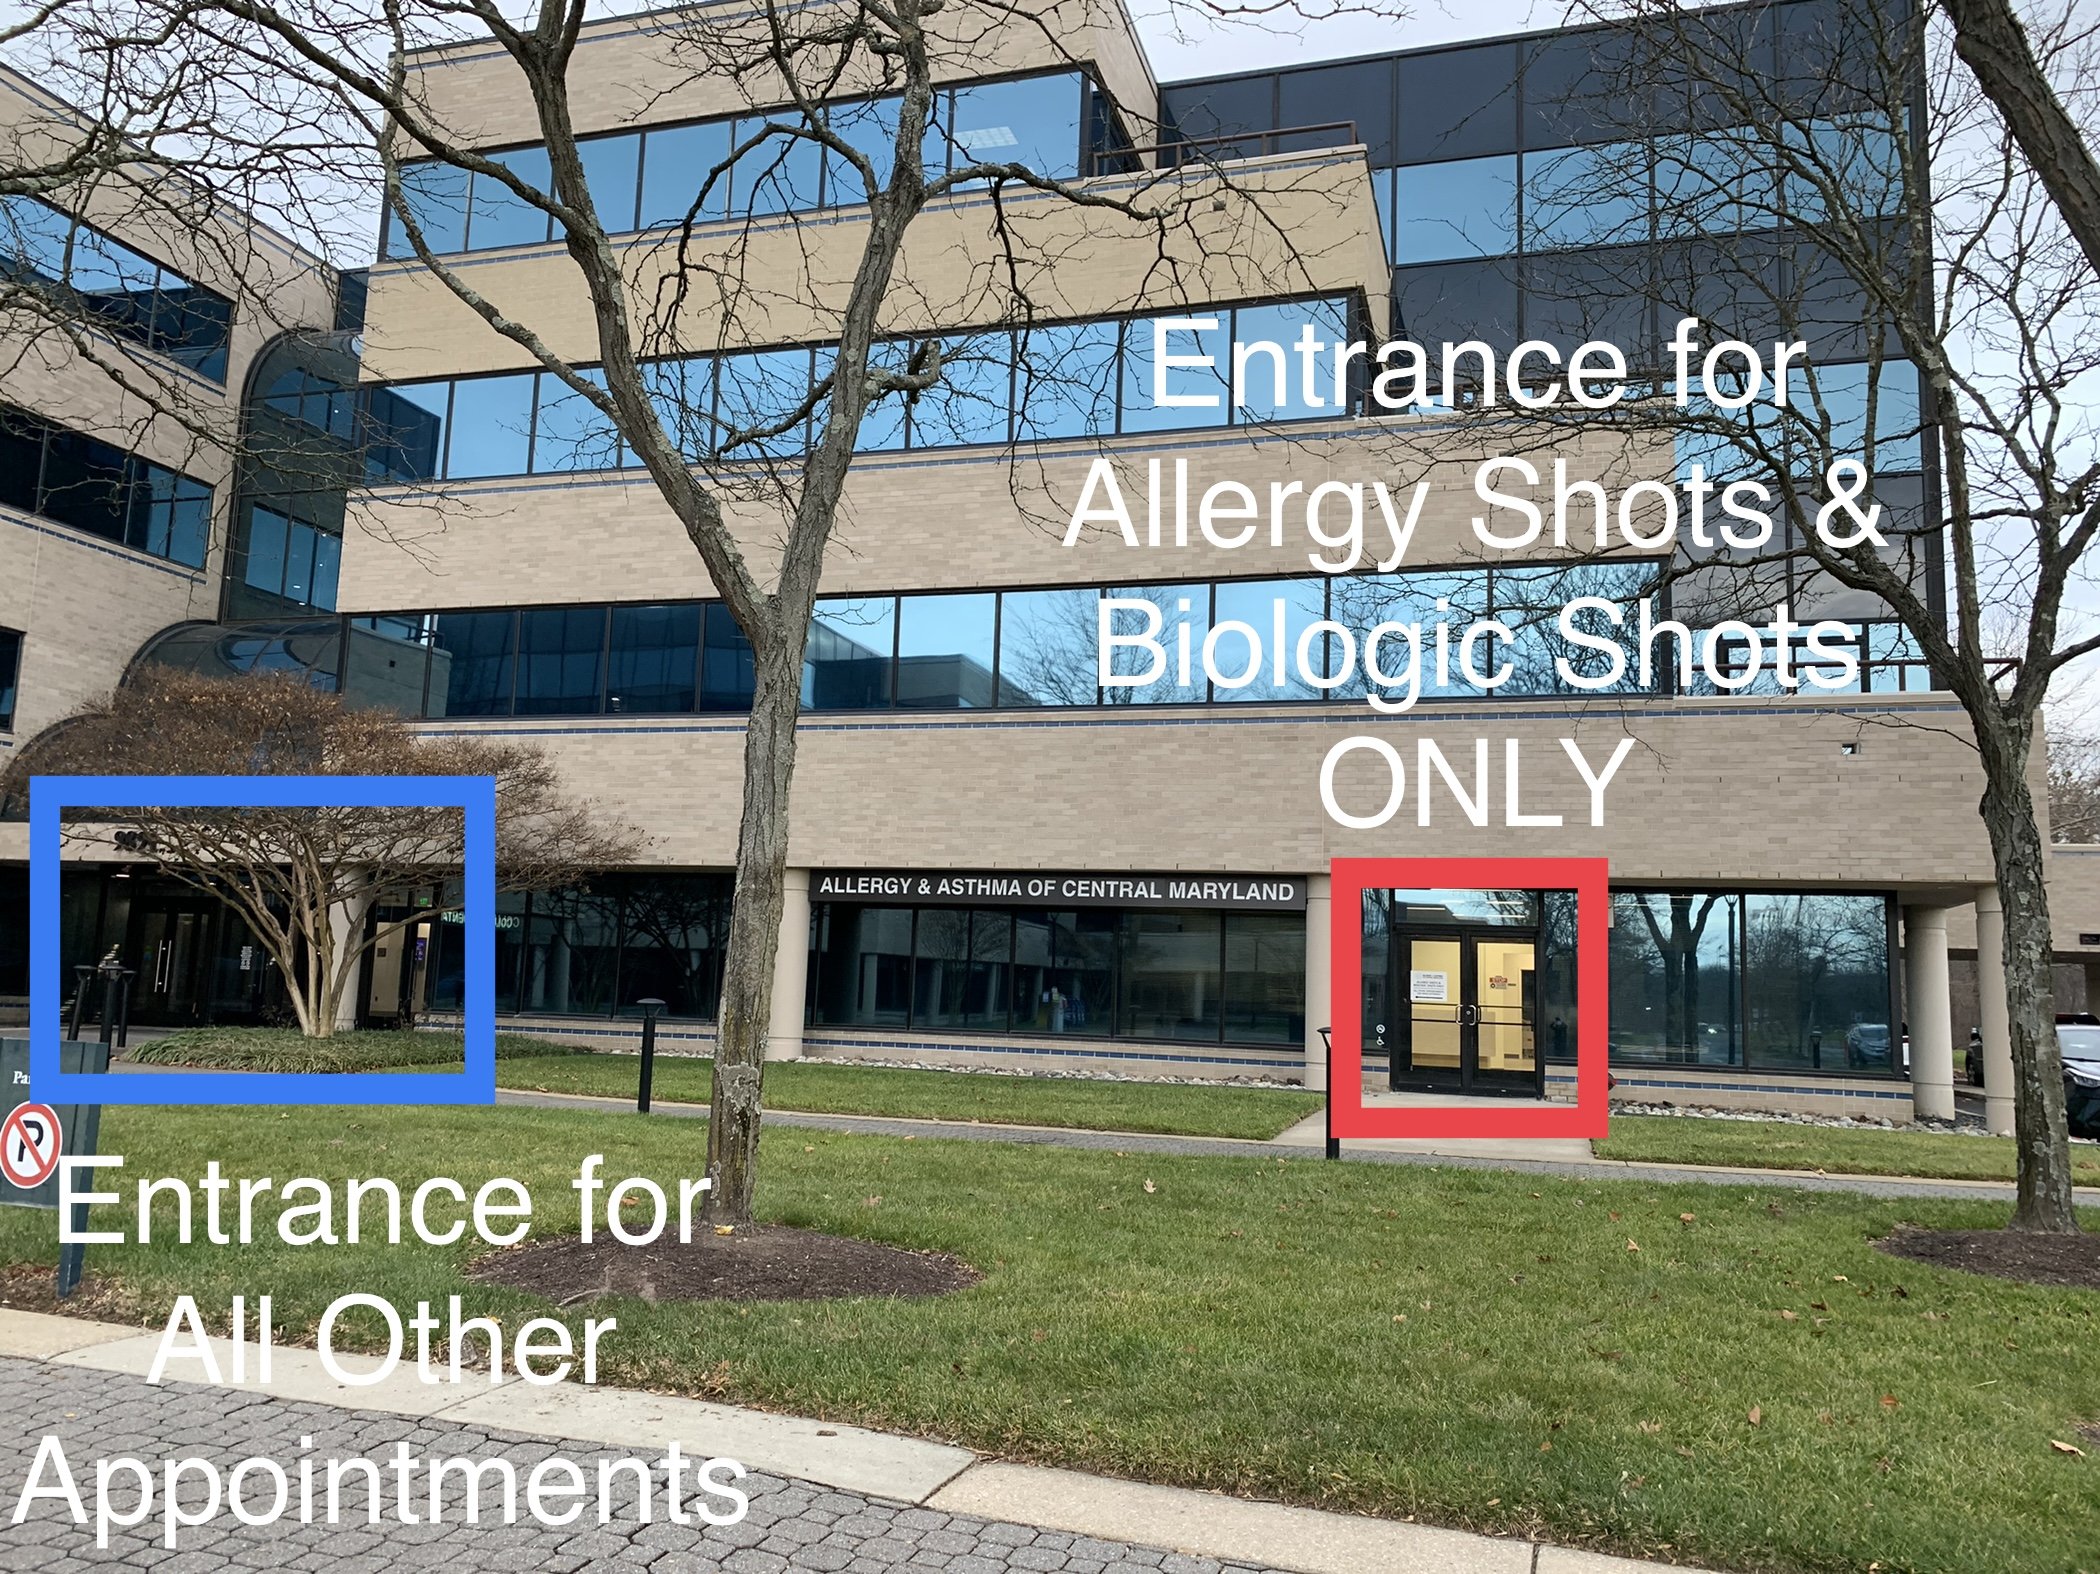 Allergy & Asthma of Central Maryland